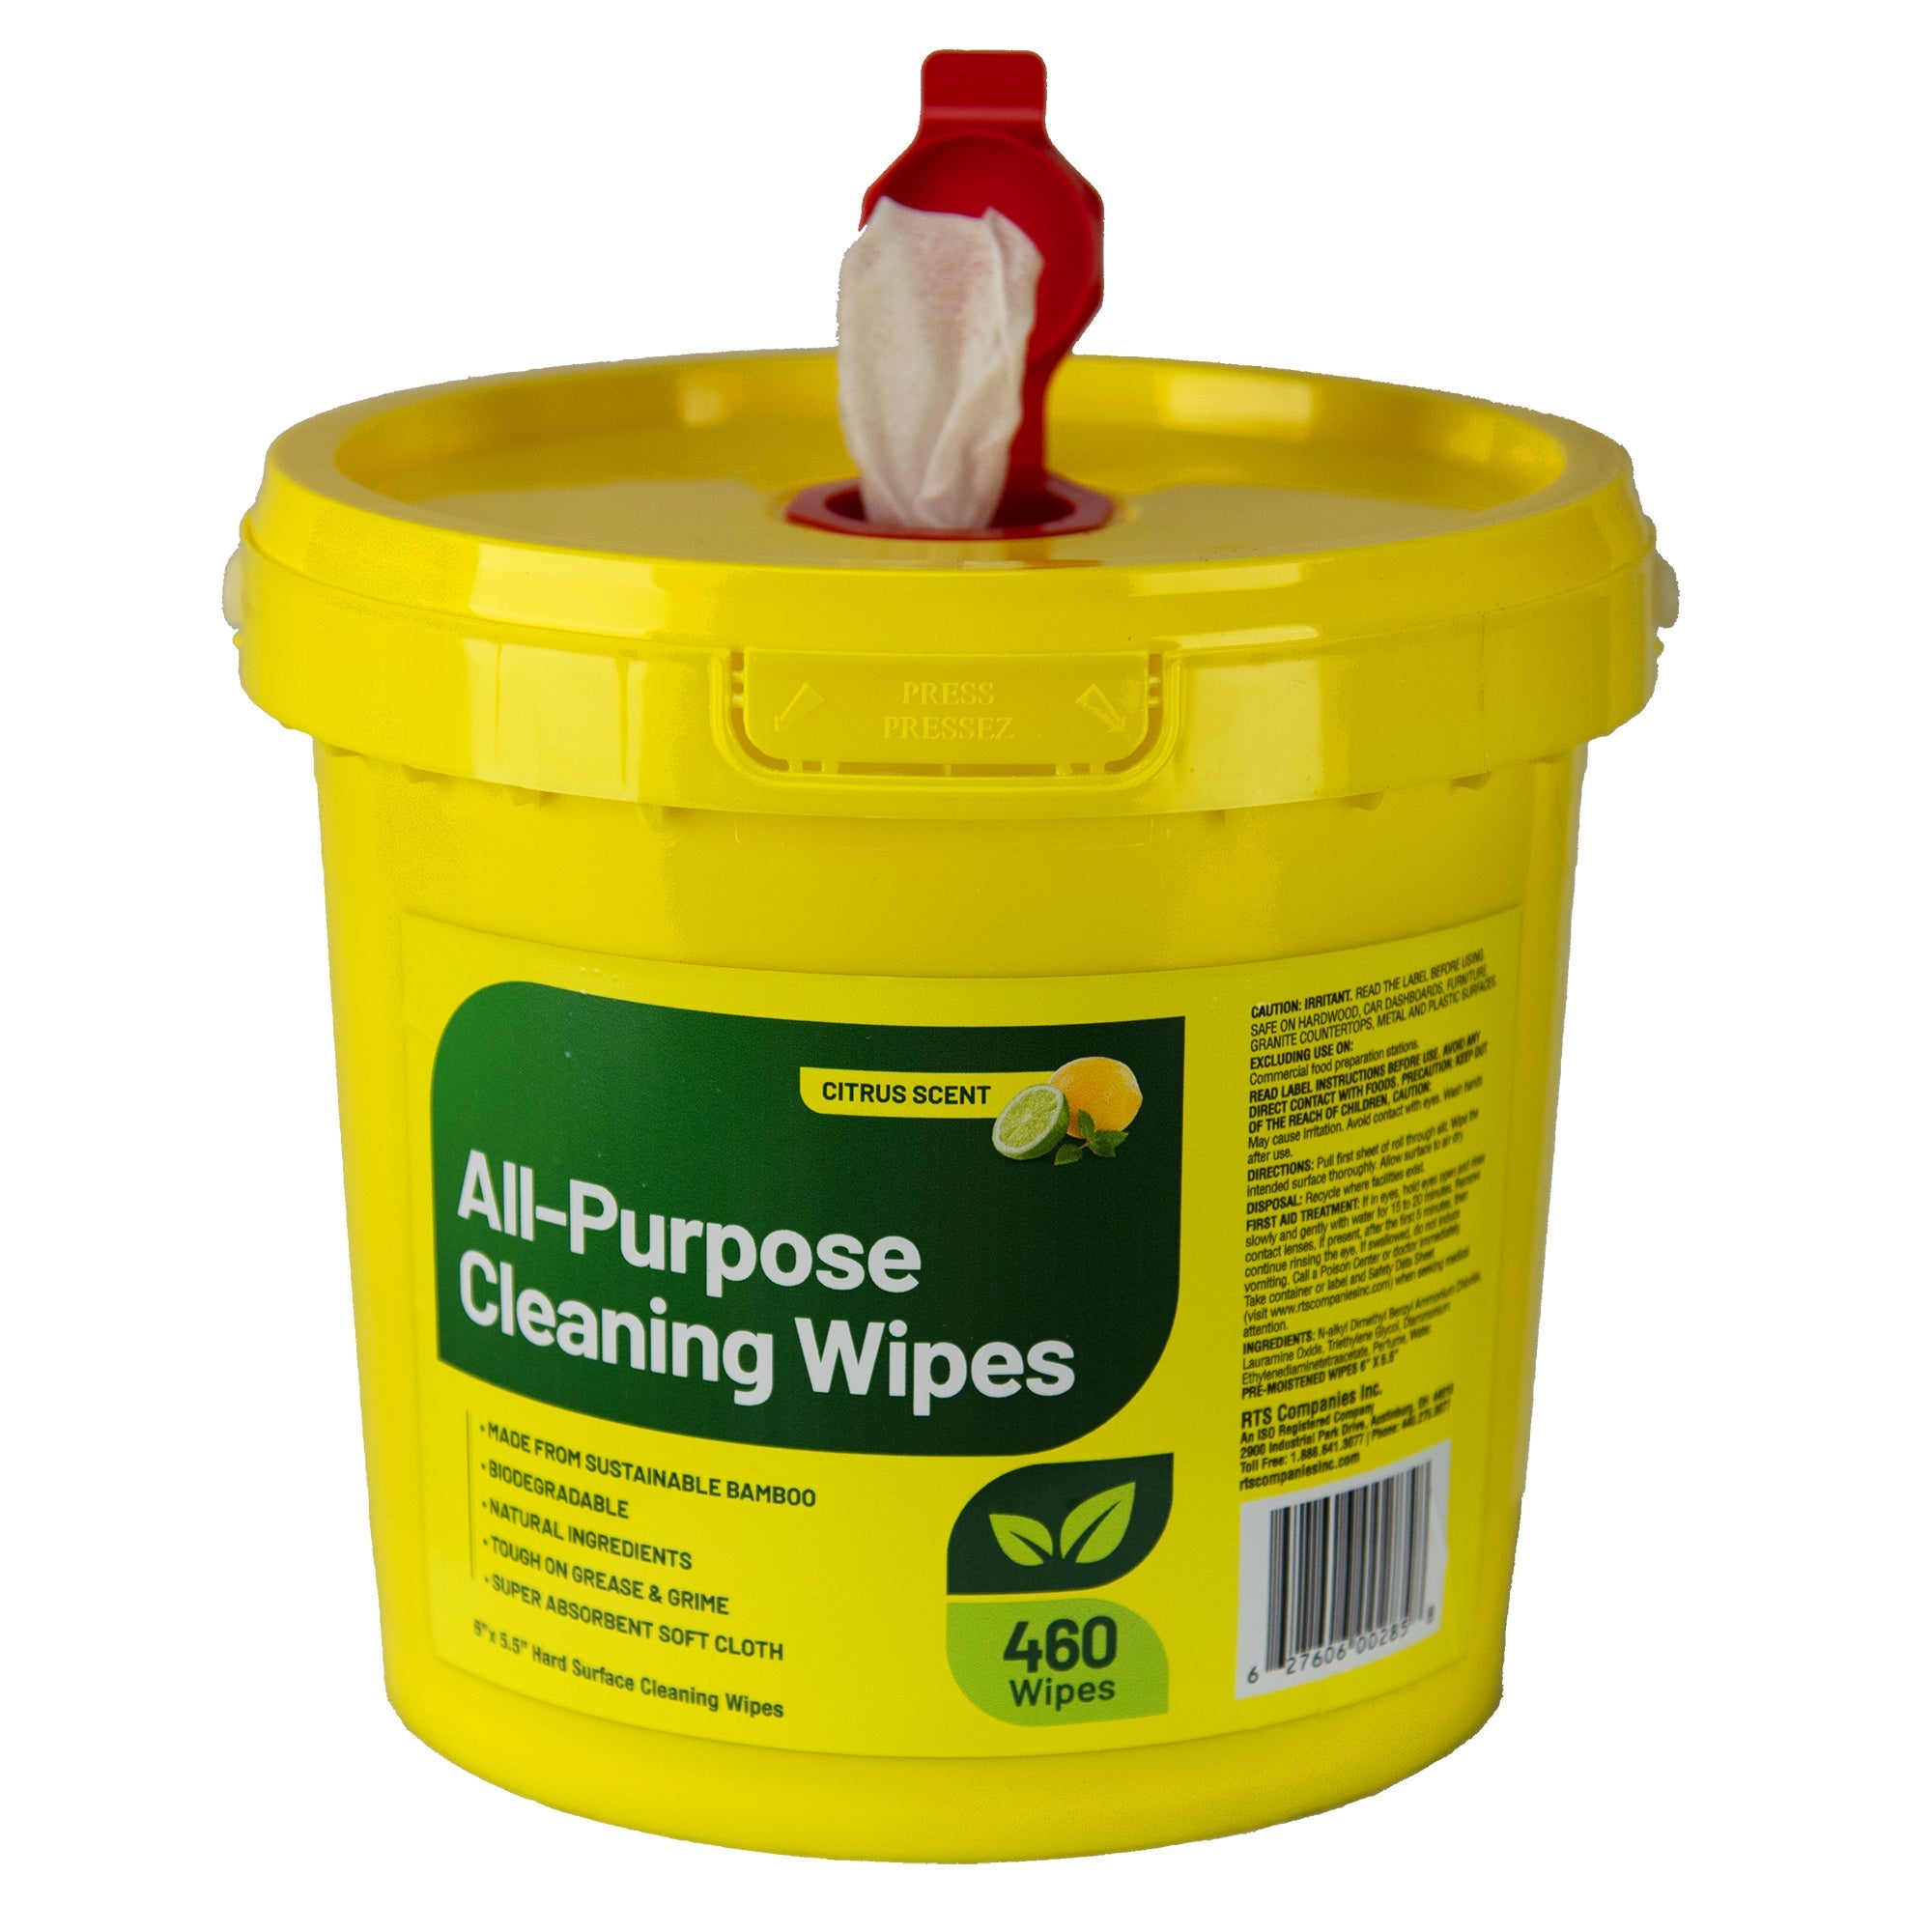 All-Purpose Cleaning Wipes, yellow bucket of 460 wipes with one wipe sticking out the top on a white background